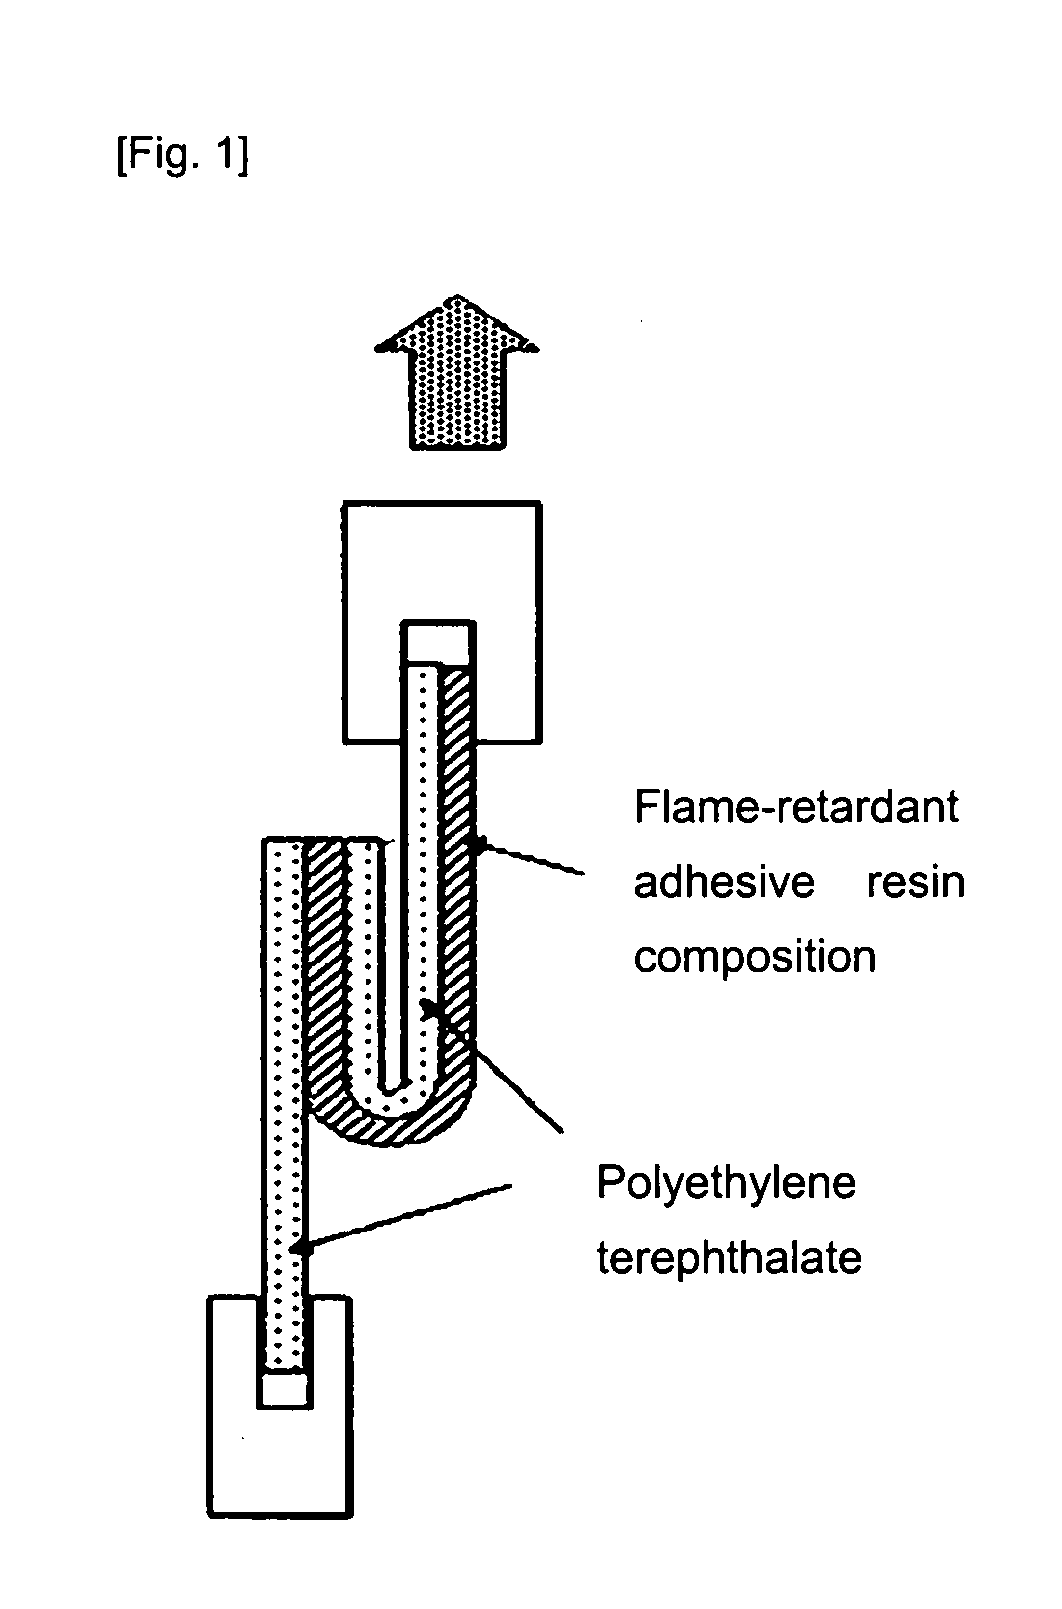 Flame-retardant adhesive composition and laminated film